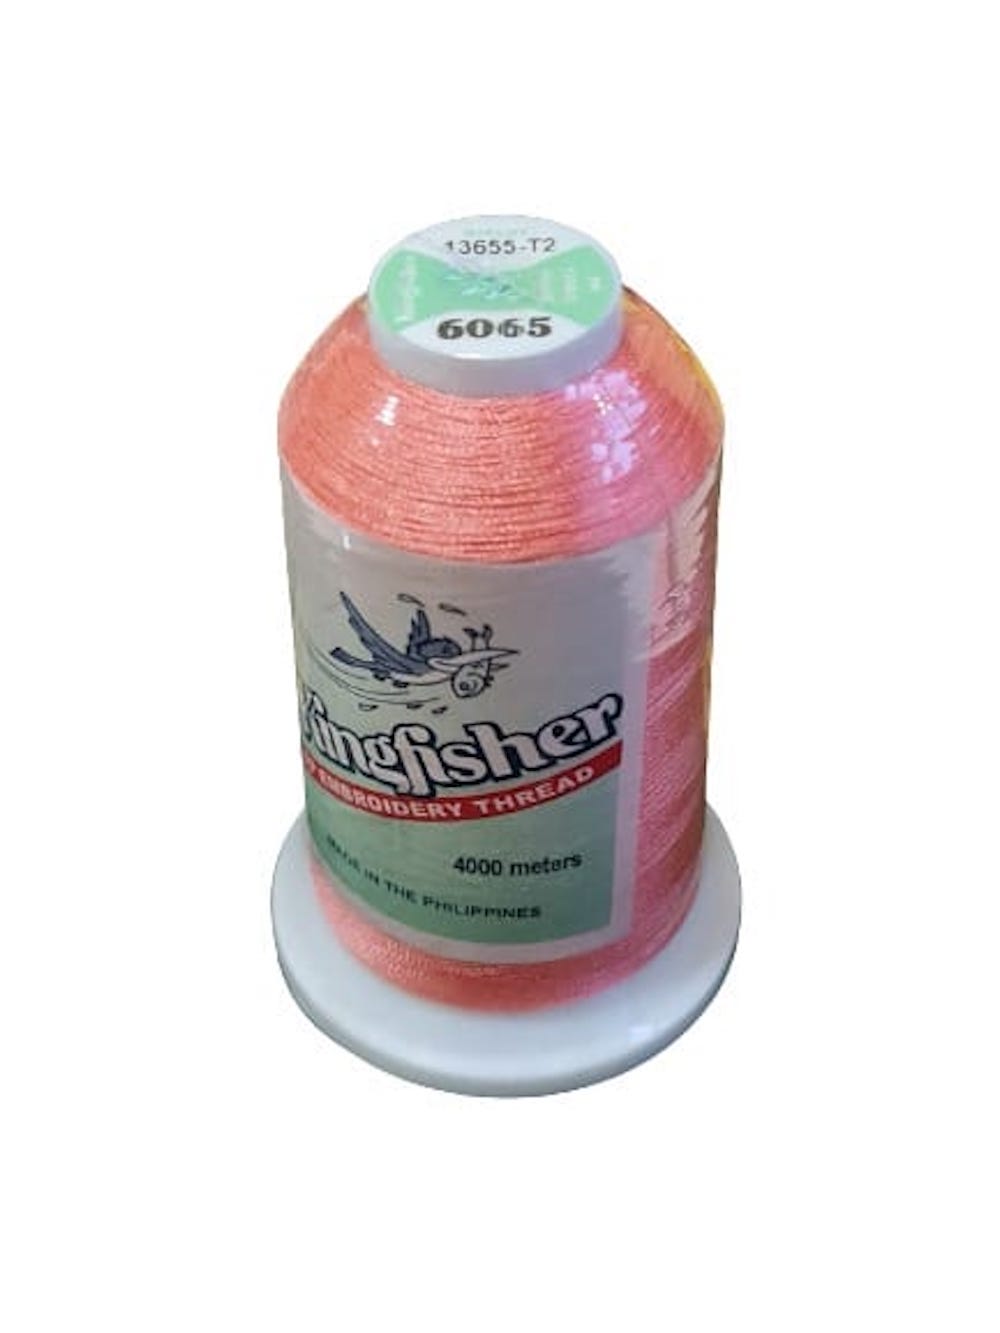 King Fisher Embroidery Thread 4000m 6065 - MY SEWING MALL